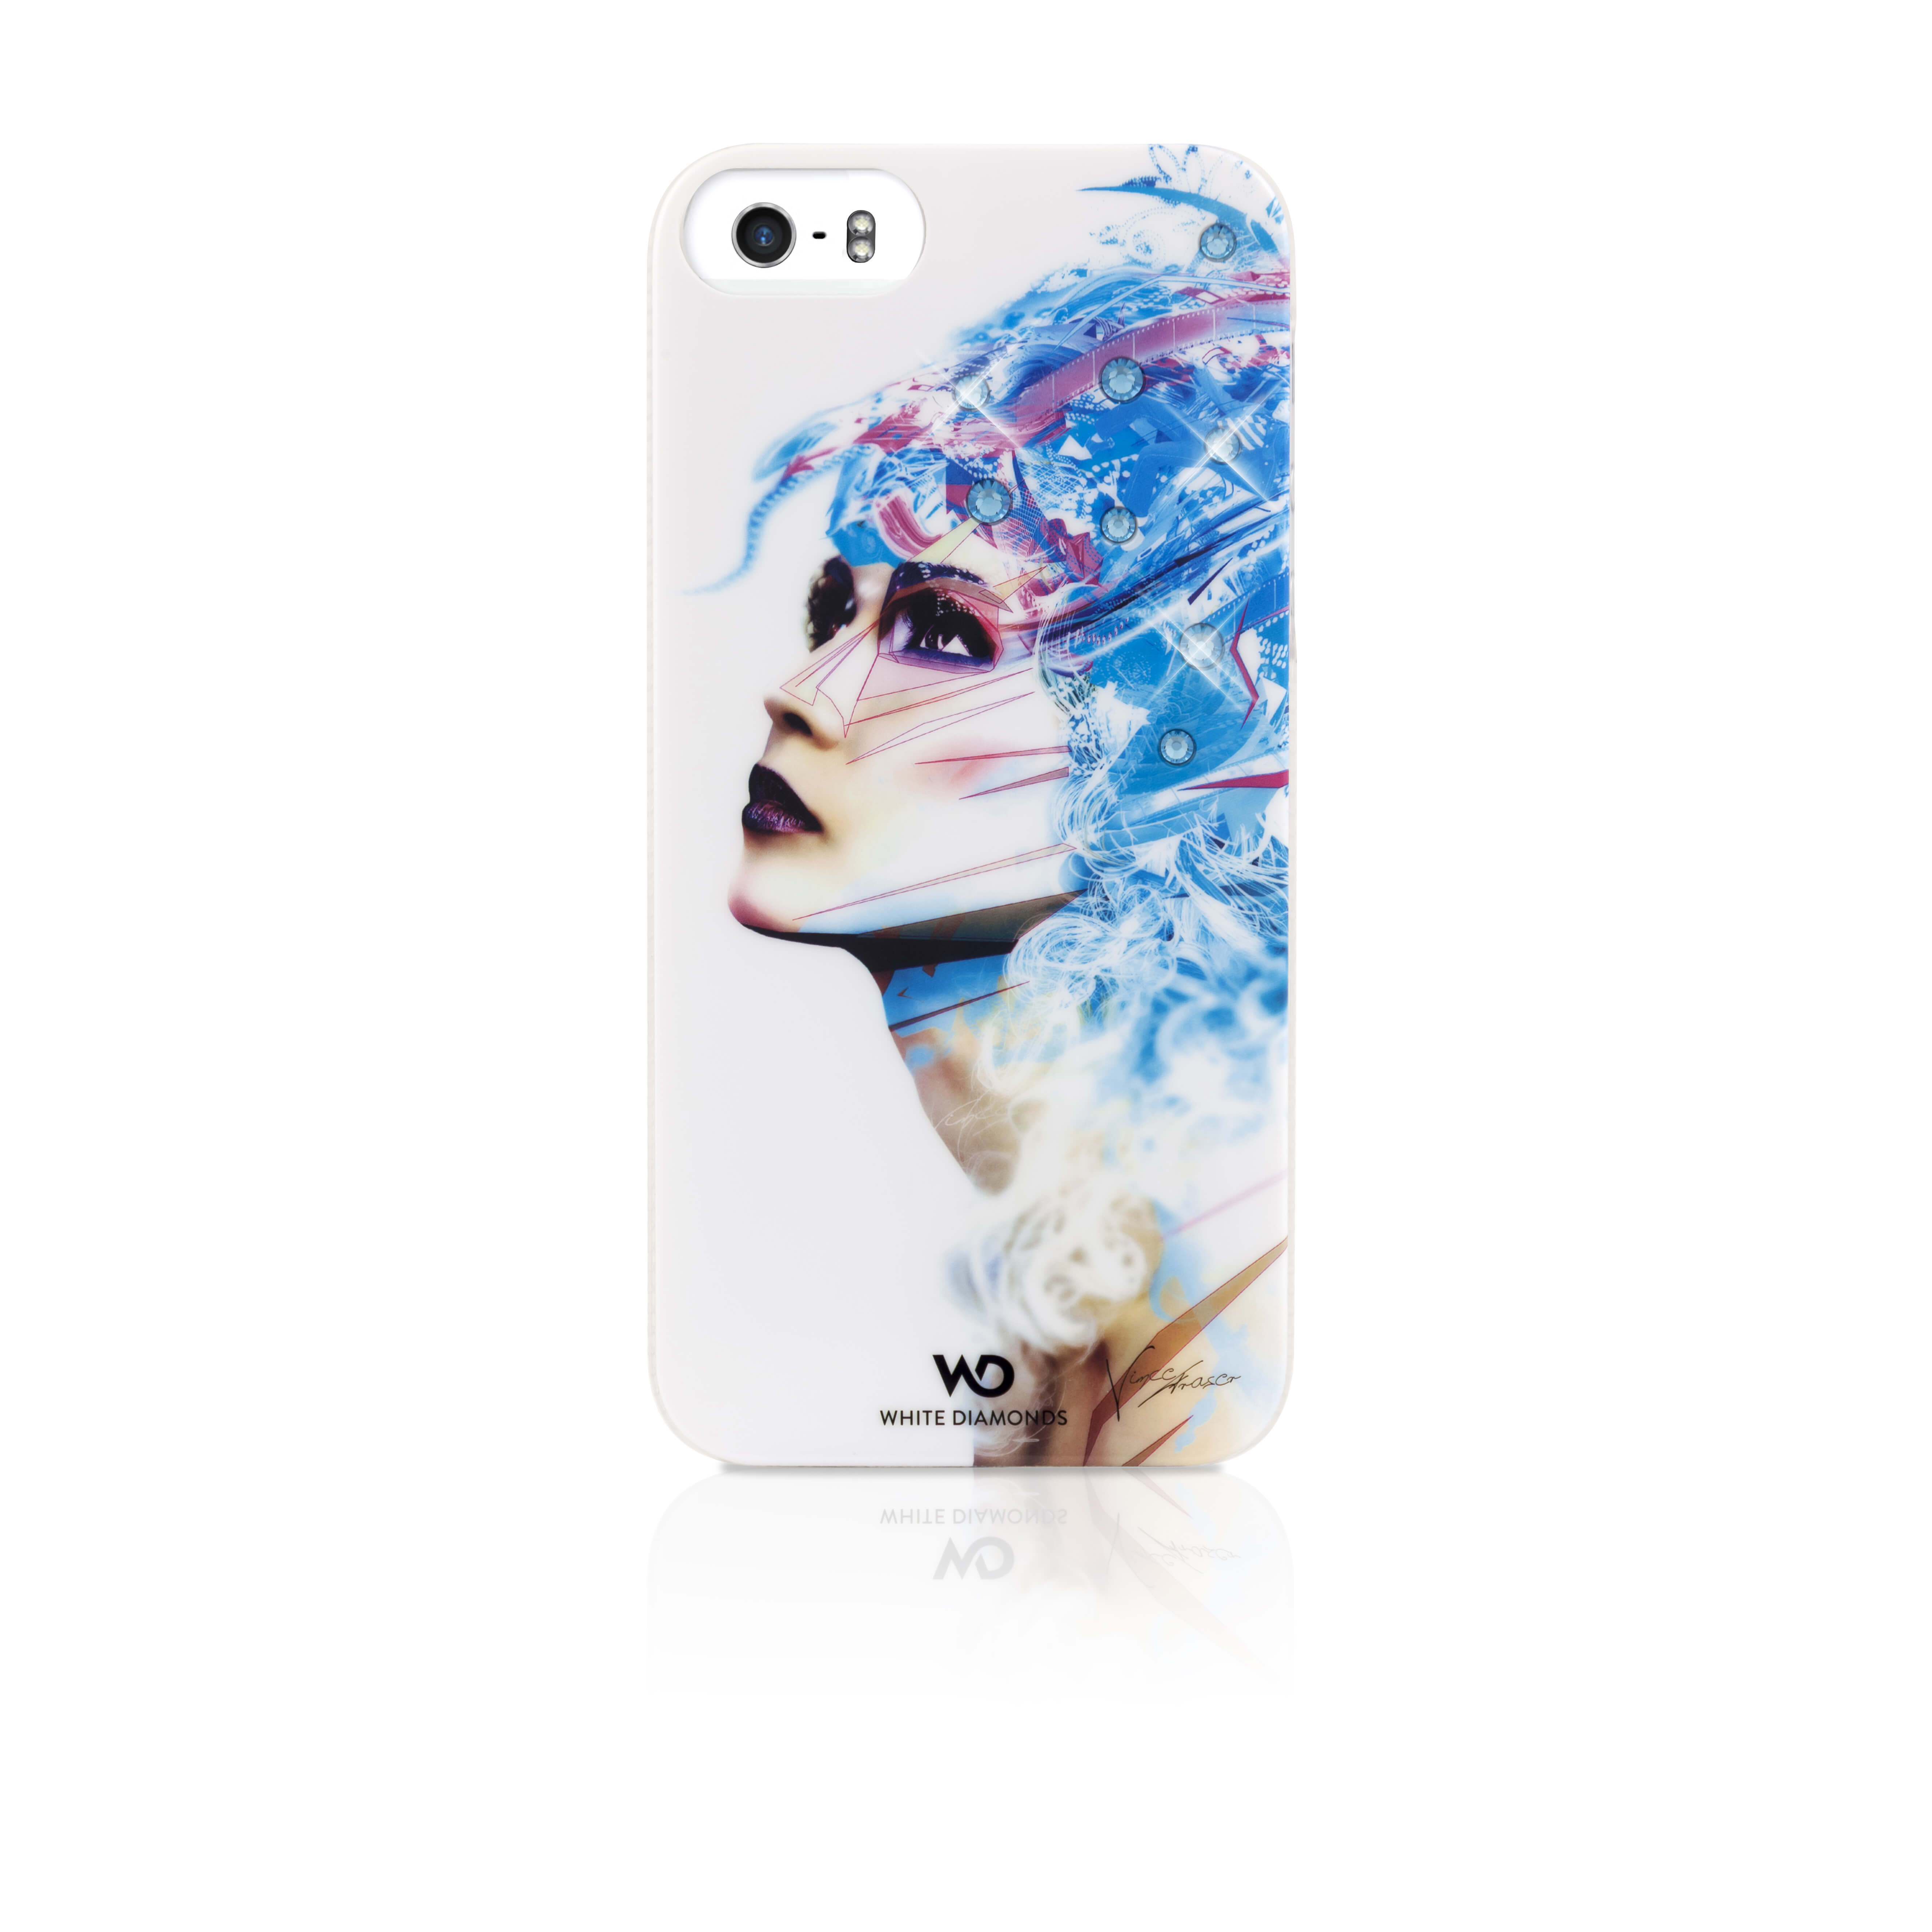 Isis Cover for Apple iPhone 5 /5s, white